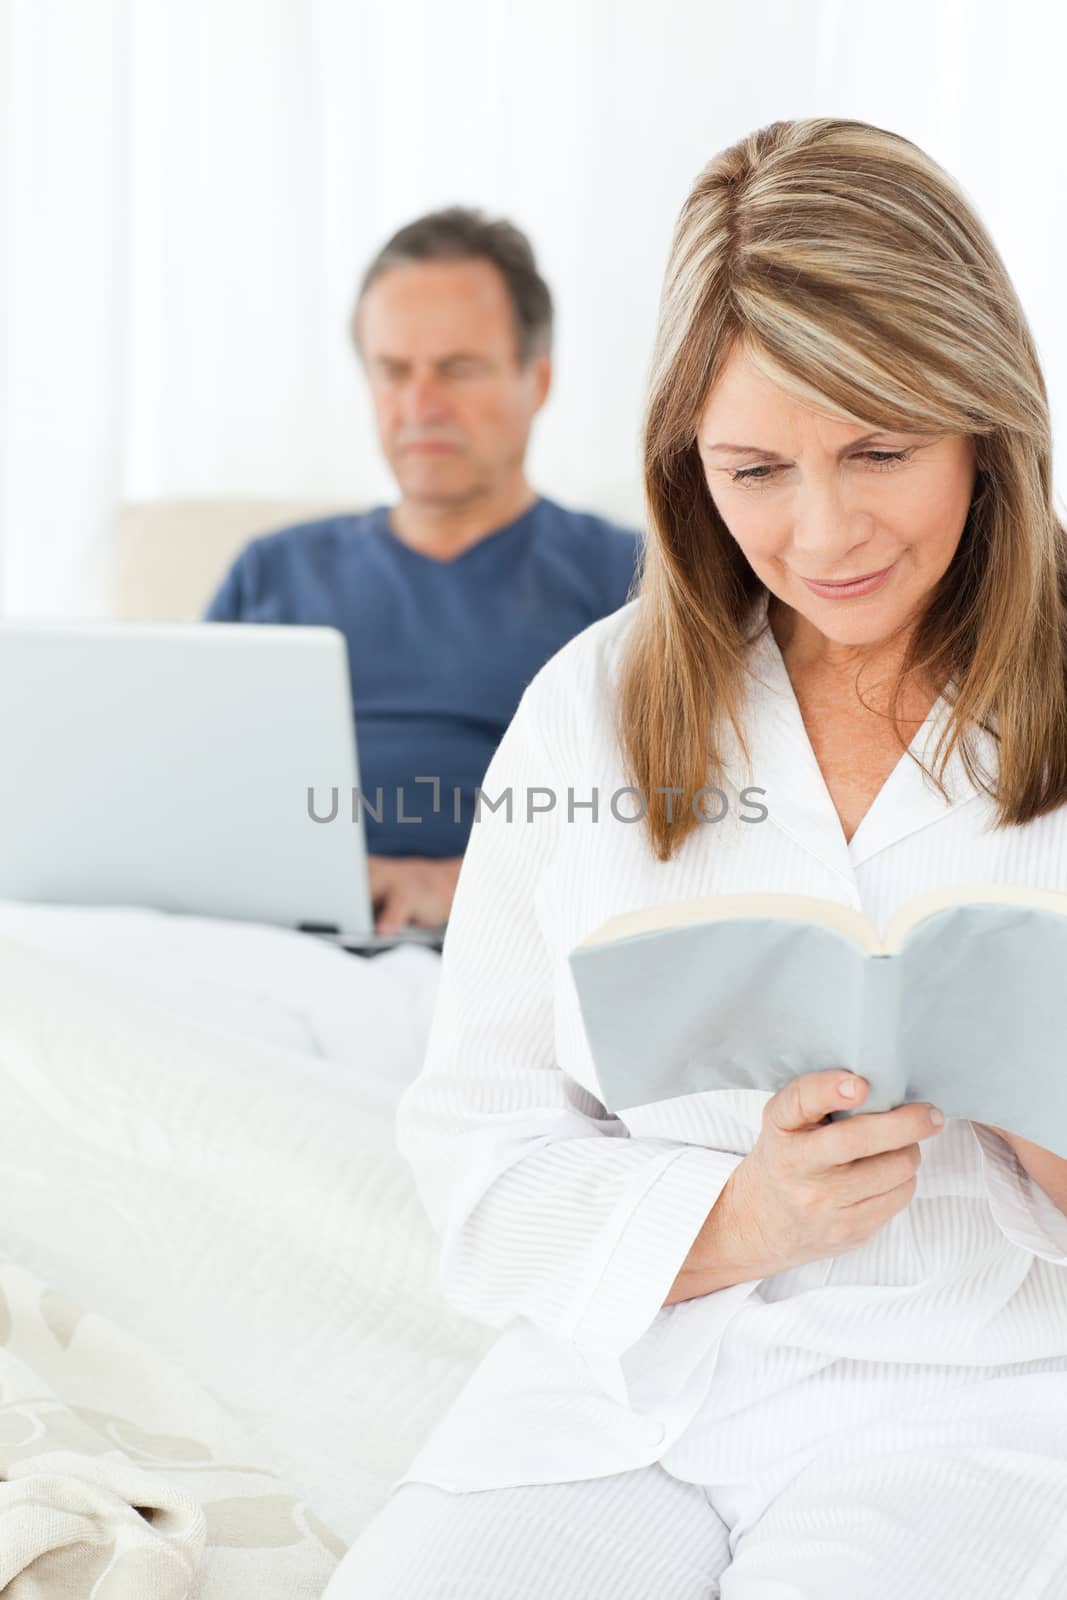 Man looking at his laptop while her wife is reading at home